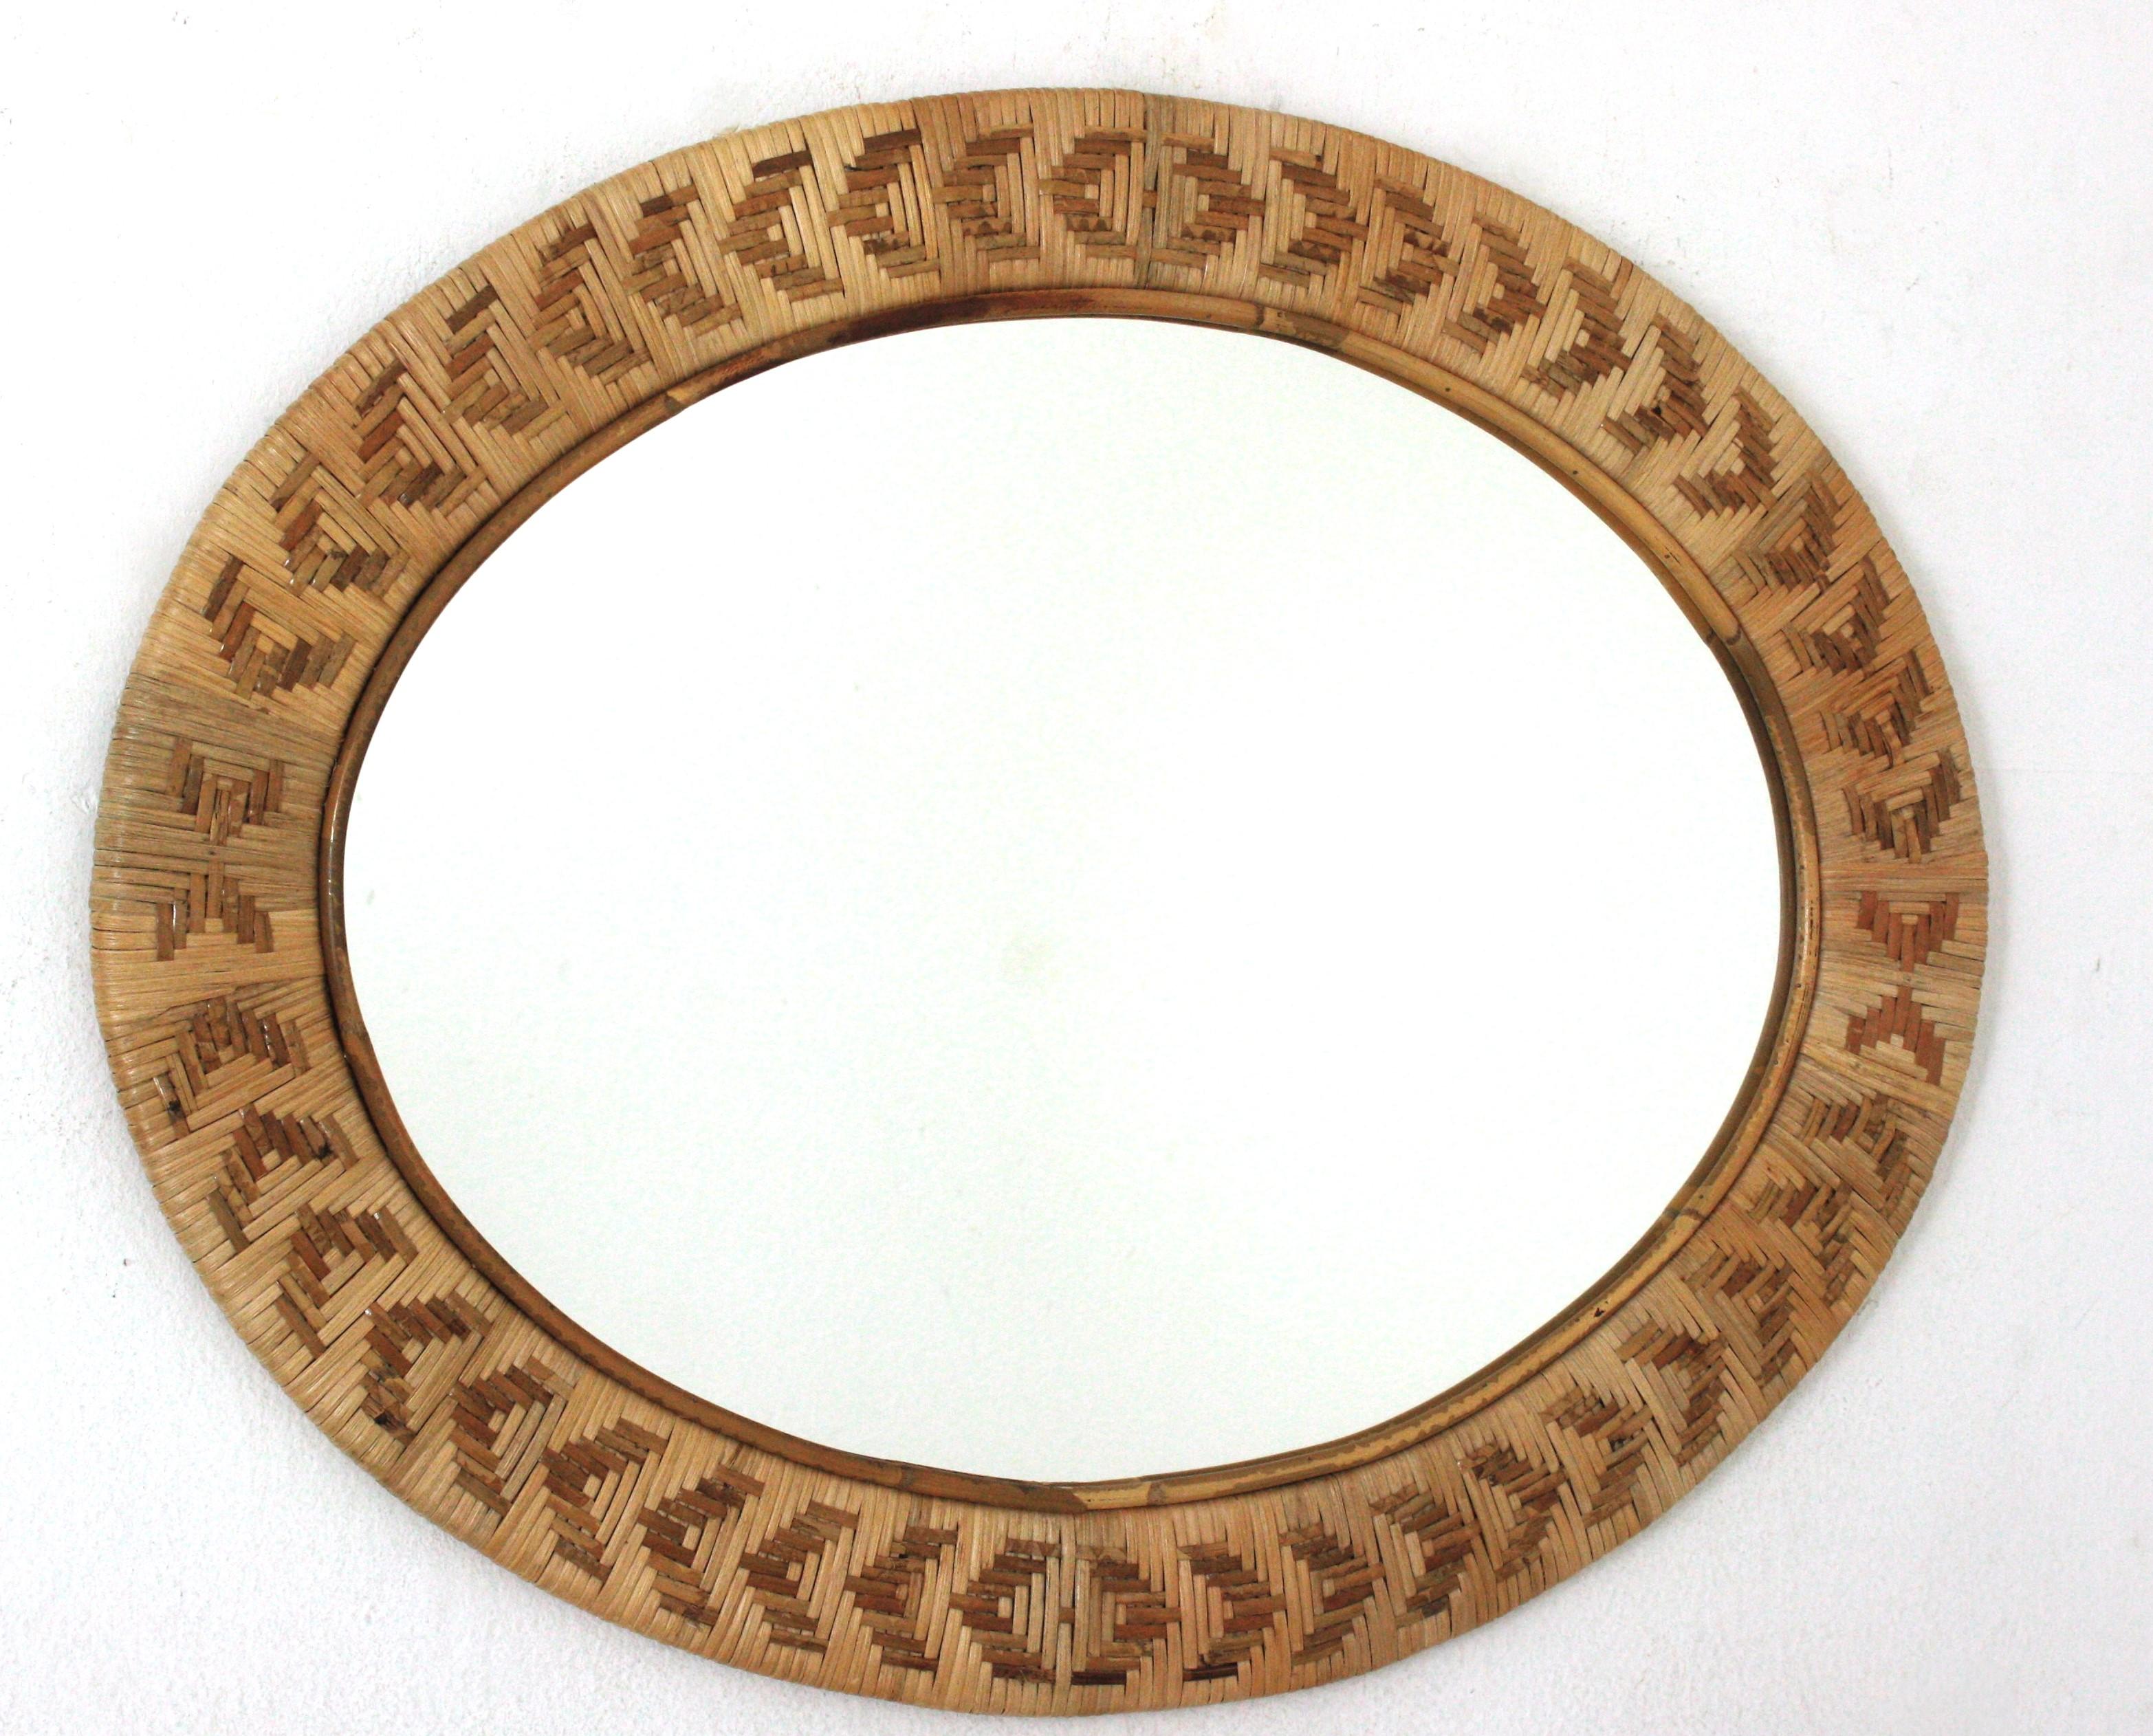 Hand braided wicker rattan oval mirror. Spain, 1960s.
Rare find.
On a wooden structure this oval mirror was upholstered with an artisan hand-woven wicker work.
Hundreds of wicker or rattan straps are nicely braided creating geometric